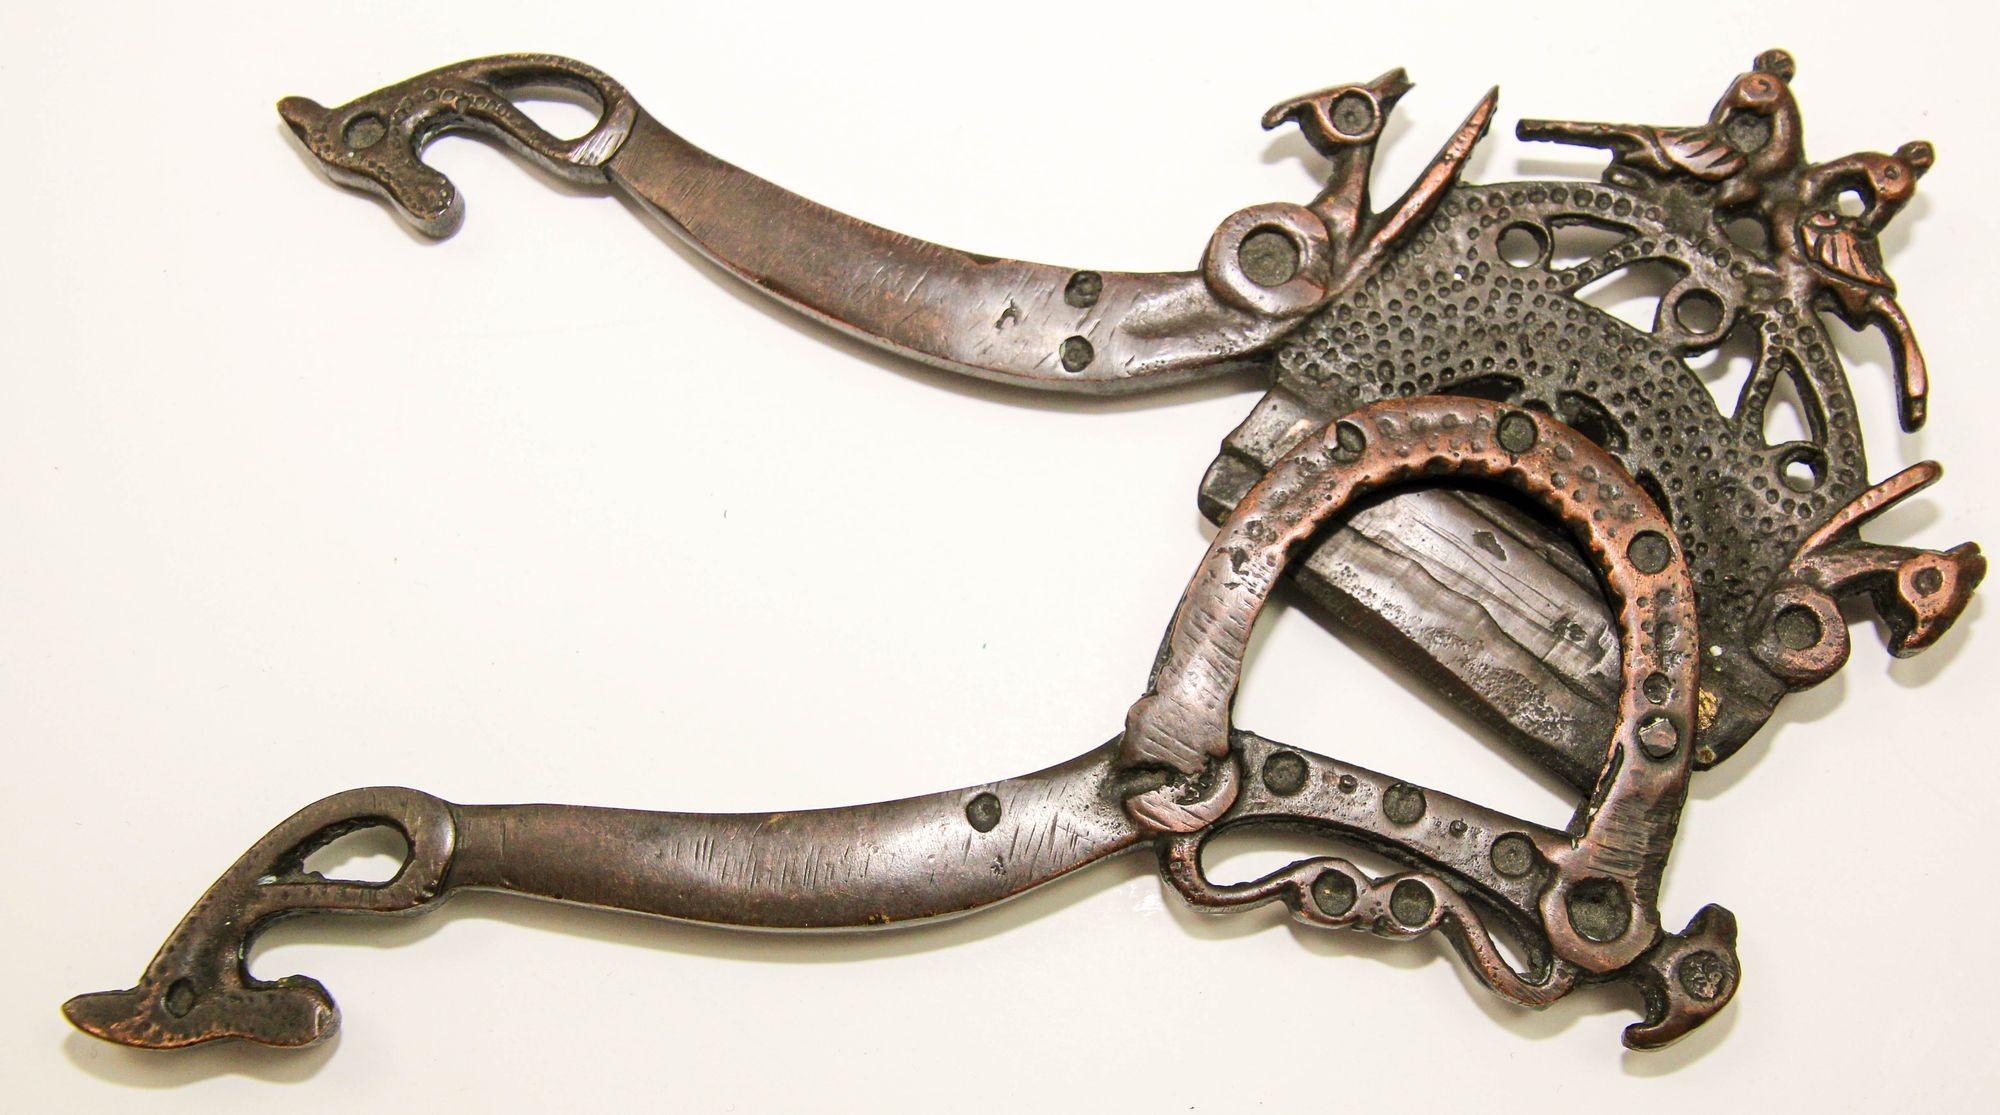 Hand-Carved Antique Brass Betel Nut Cutter from India Collectible Asian Artifact For Sale